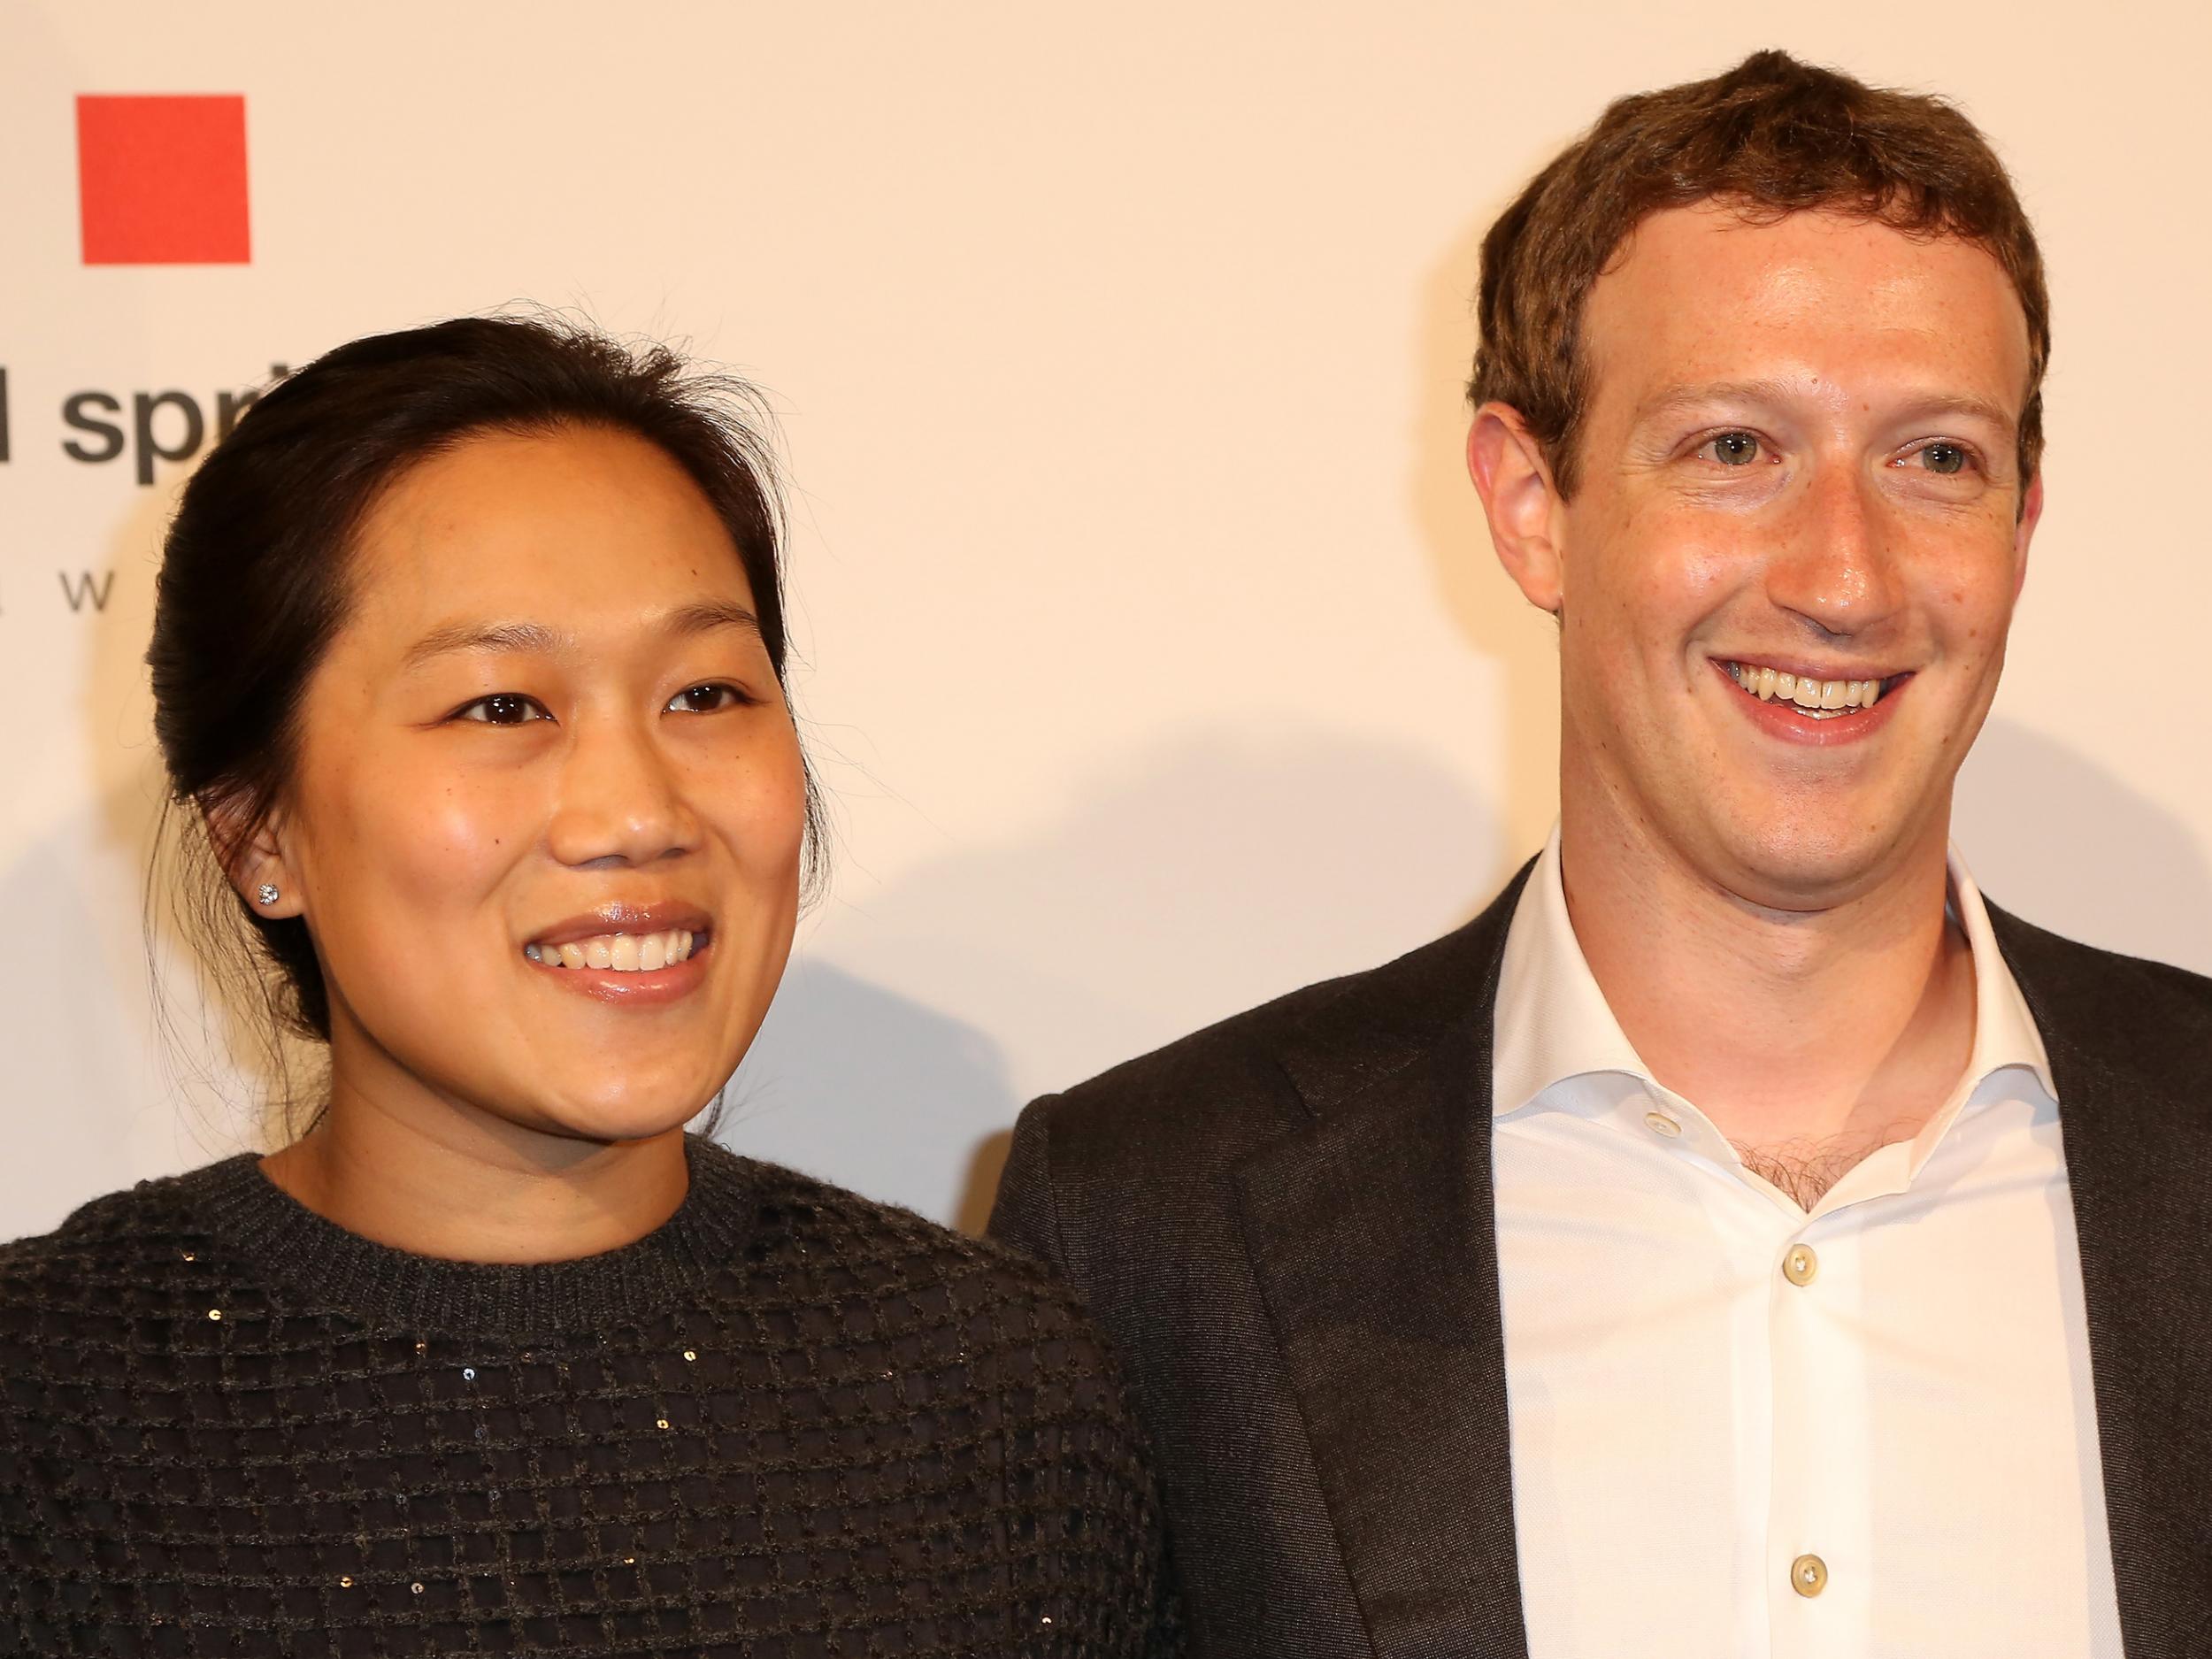 Facebook founder Mark Zuckerberg expecting a second daughter with wife Priscilla Chan The Independent The Independent